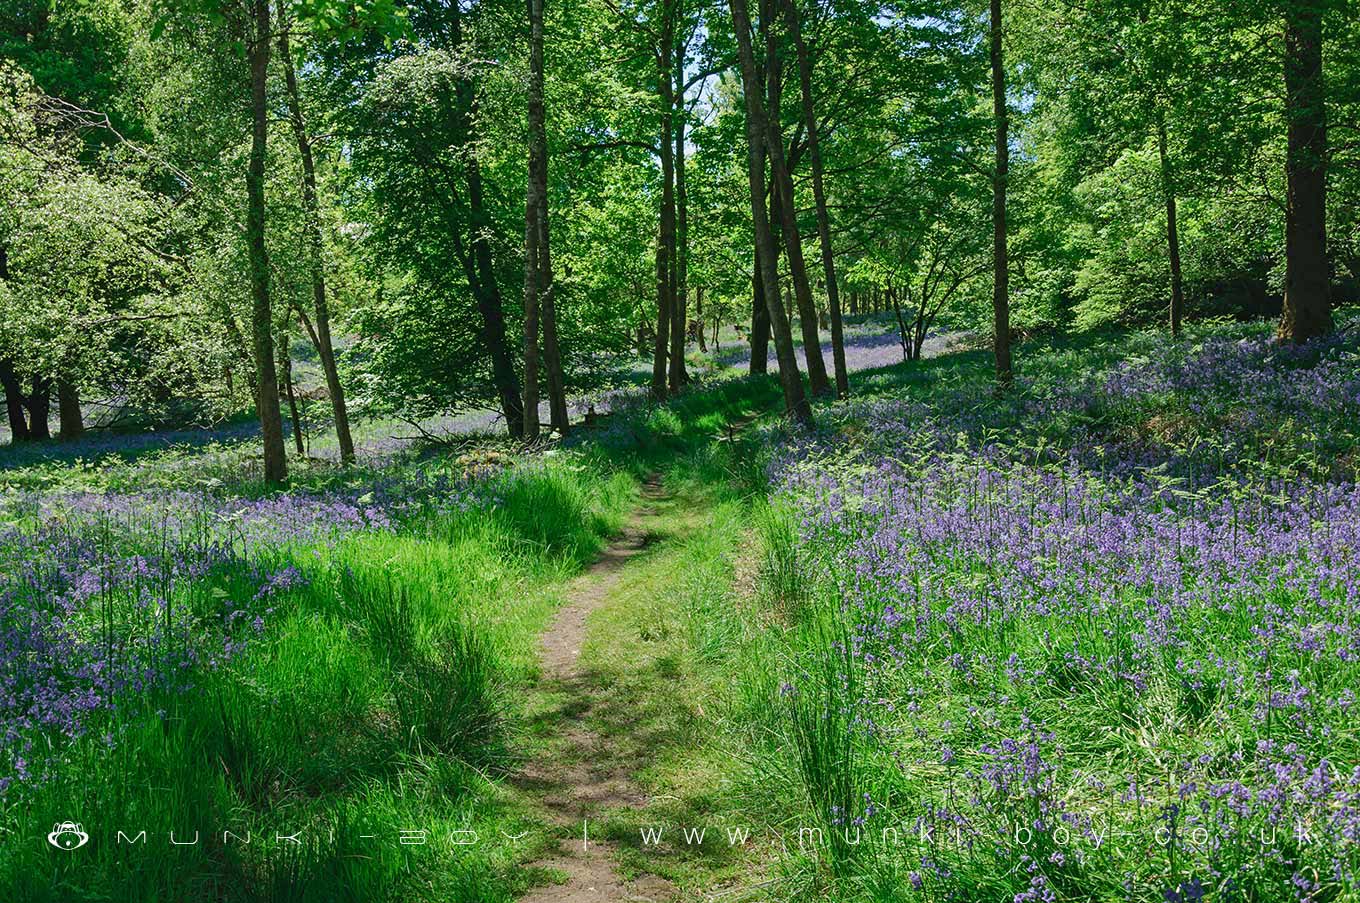 Bluebell Woods in Ambleside